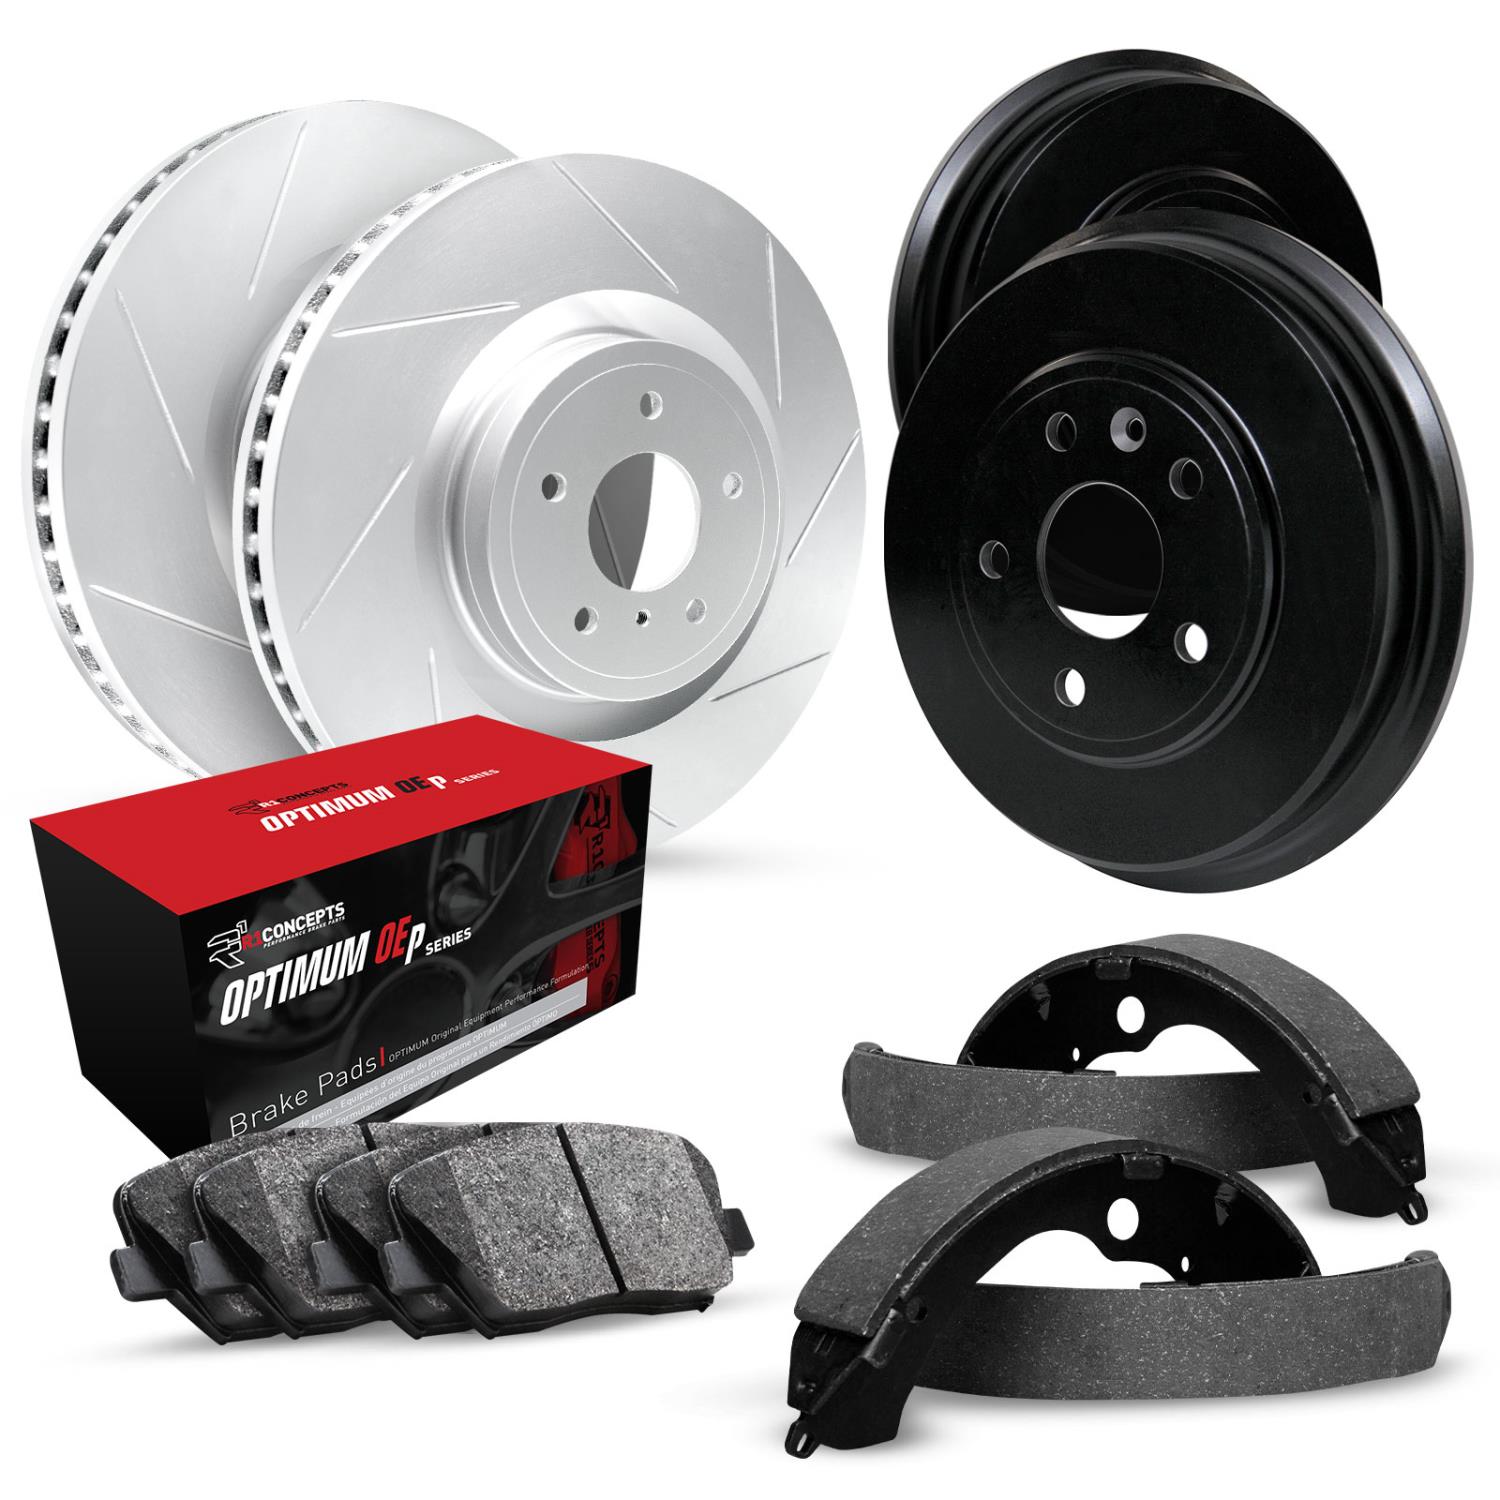 GEO-Carbon Slotted Brake Rotor & Drum Set w/Optimum OE Pads & Shoes, 1982-1982 GM, Position: Front & Rear